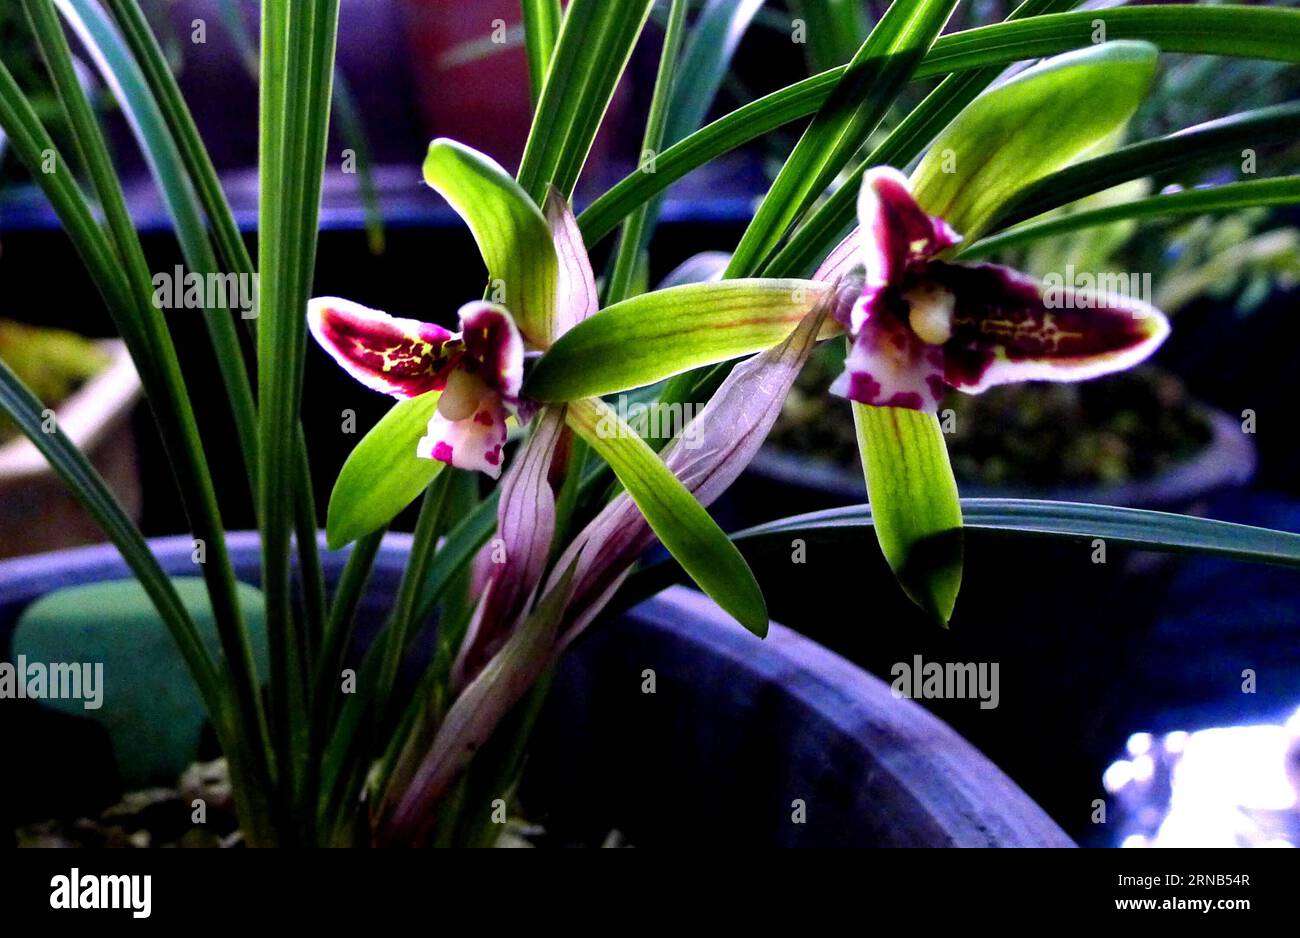 (160219) -- SUZHOU, Feb. 19, 2016 -- Photo taken on Feb. 19, 2016 shows orchids at Canglang Pavilion in Suzhou, east China s Jiangsu Province. The ten-day 2016 Suzhou spring orchid show will kick off at in Suzhou on Feb. 20, 2016 and showcase over 2,00O orchids of 70 varieties. ) (yxb) CHINA-SUZHOU-ORCHID-EXHIBITON(CN) WangxJianzhong PUBLICATIONxNOTxINxCHN   Suzhou Feb 19 2016 Photo Taken ON Feb 19 2016 Shows Orchids AT Canglang Pavilion in Suzhou East China S Jiangsu Province The ten Day 2016 Suzhou Spring Orchid Show will Kick off AT in Suzhou ON Feb 20 2016 and Showcase Over 2  Orchids of 7 Stock Photo